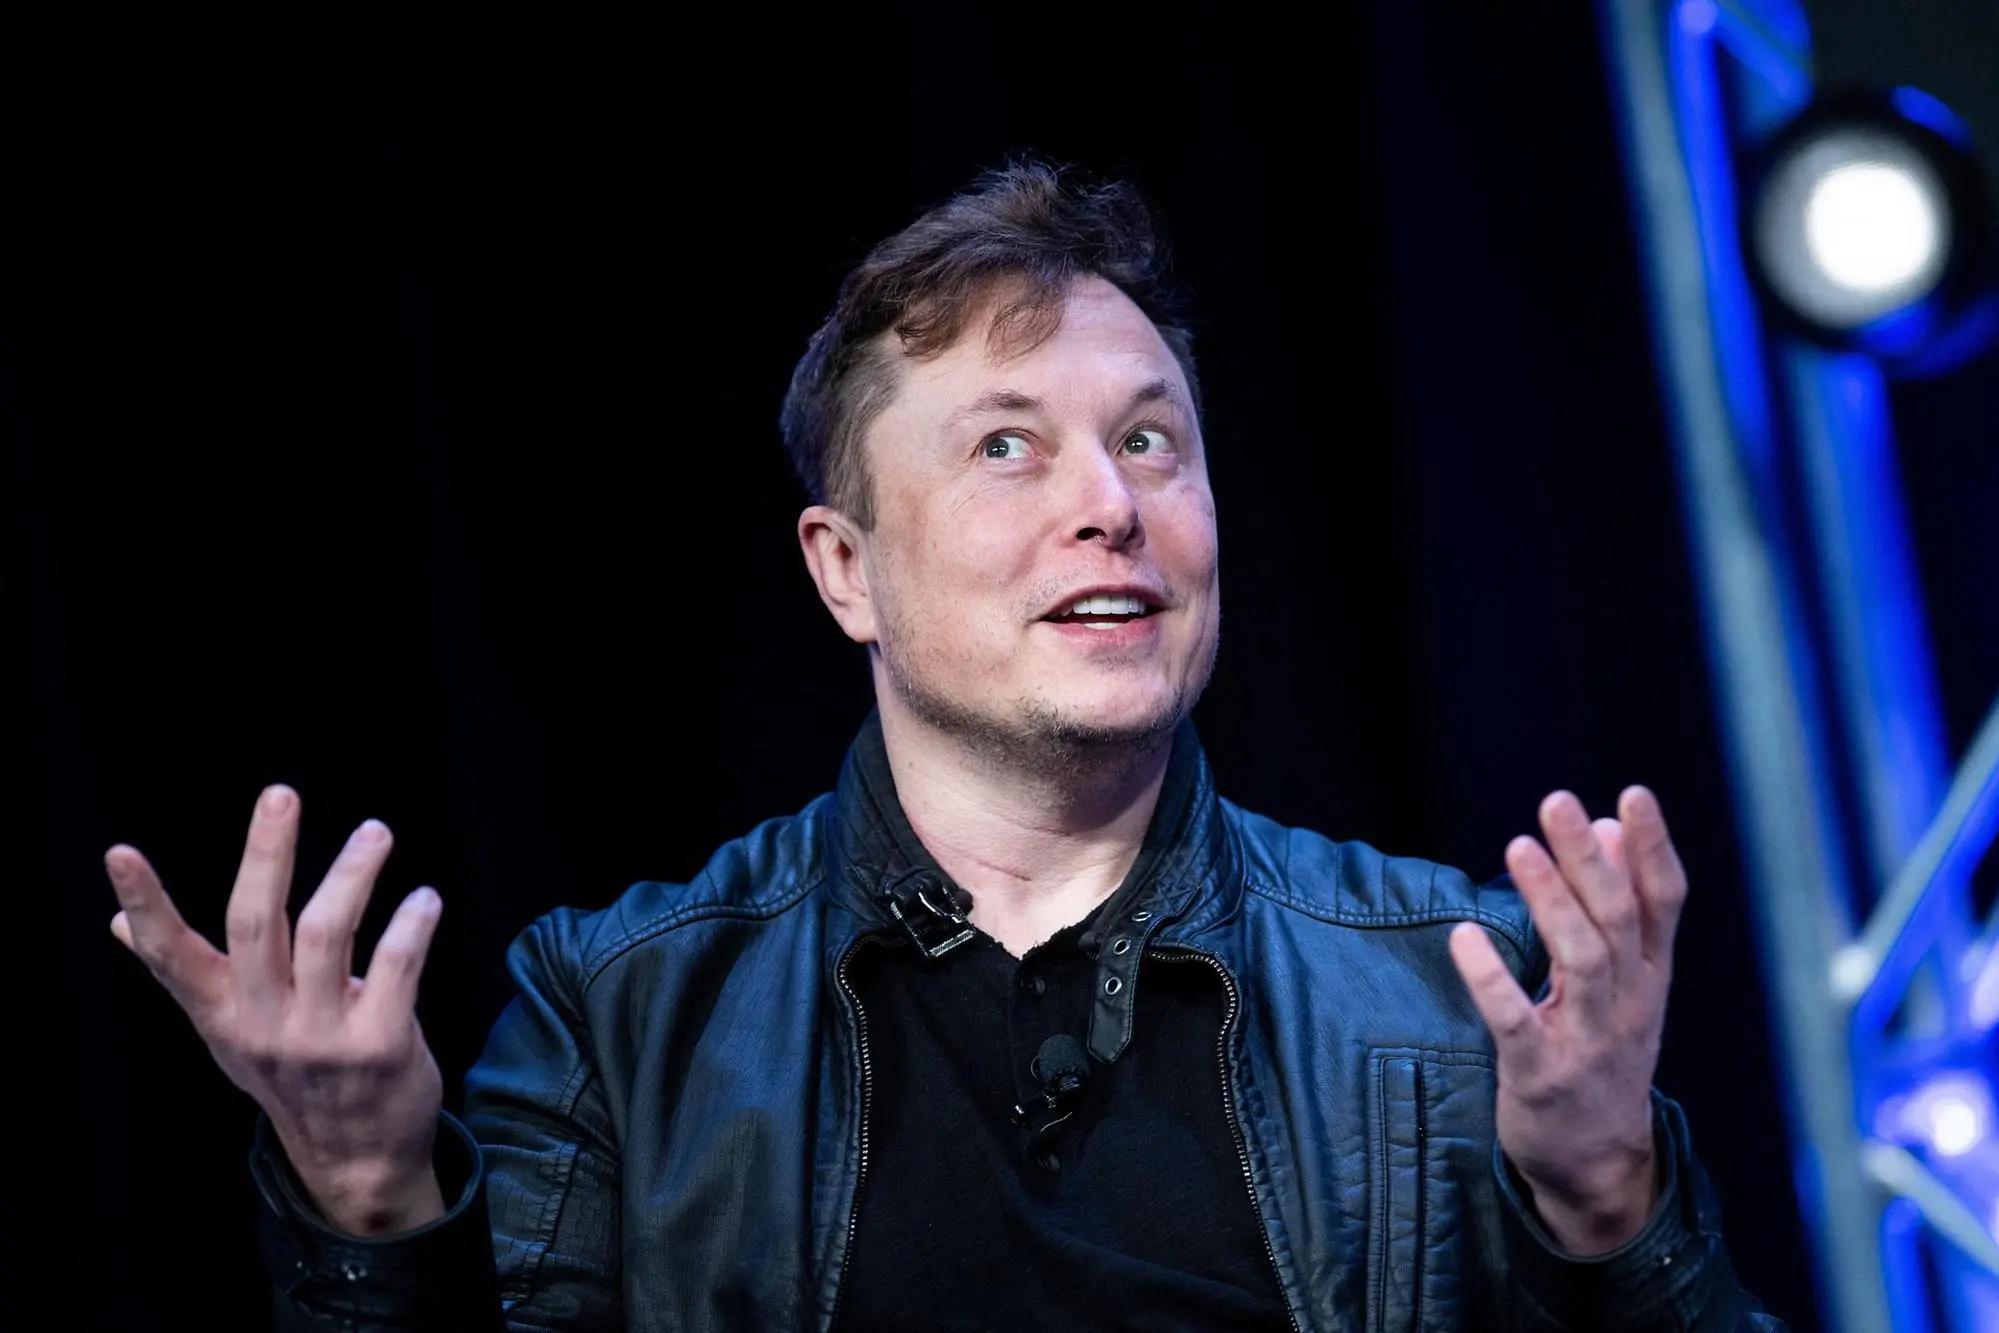 (FILES) In this file photo taken on March 09, 2020: Elon Musk, founder of SpaceX, speaks during the Satellite 2020 at the Washington Convention Center in Washington, DC. - Time Magazine announced that Musk will be their " 2021 Person of the Year" on December 13, 2021. (Photo by Brendan Smialowski / AFP)